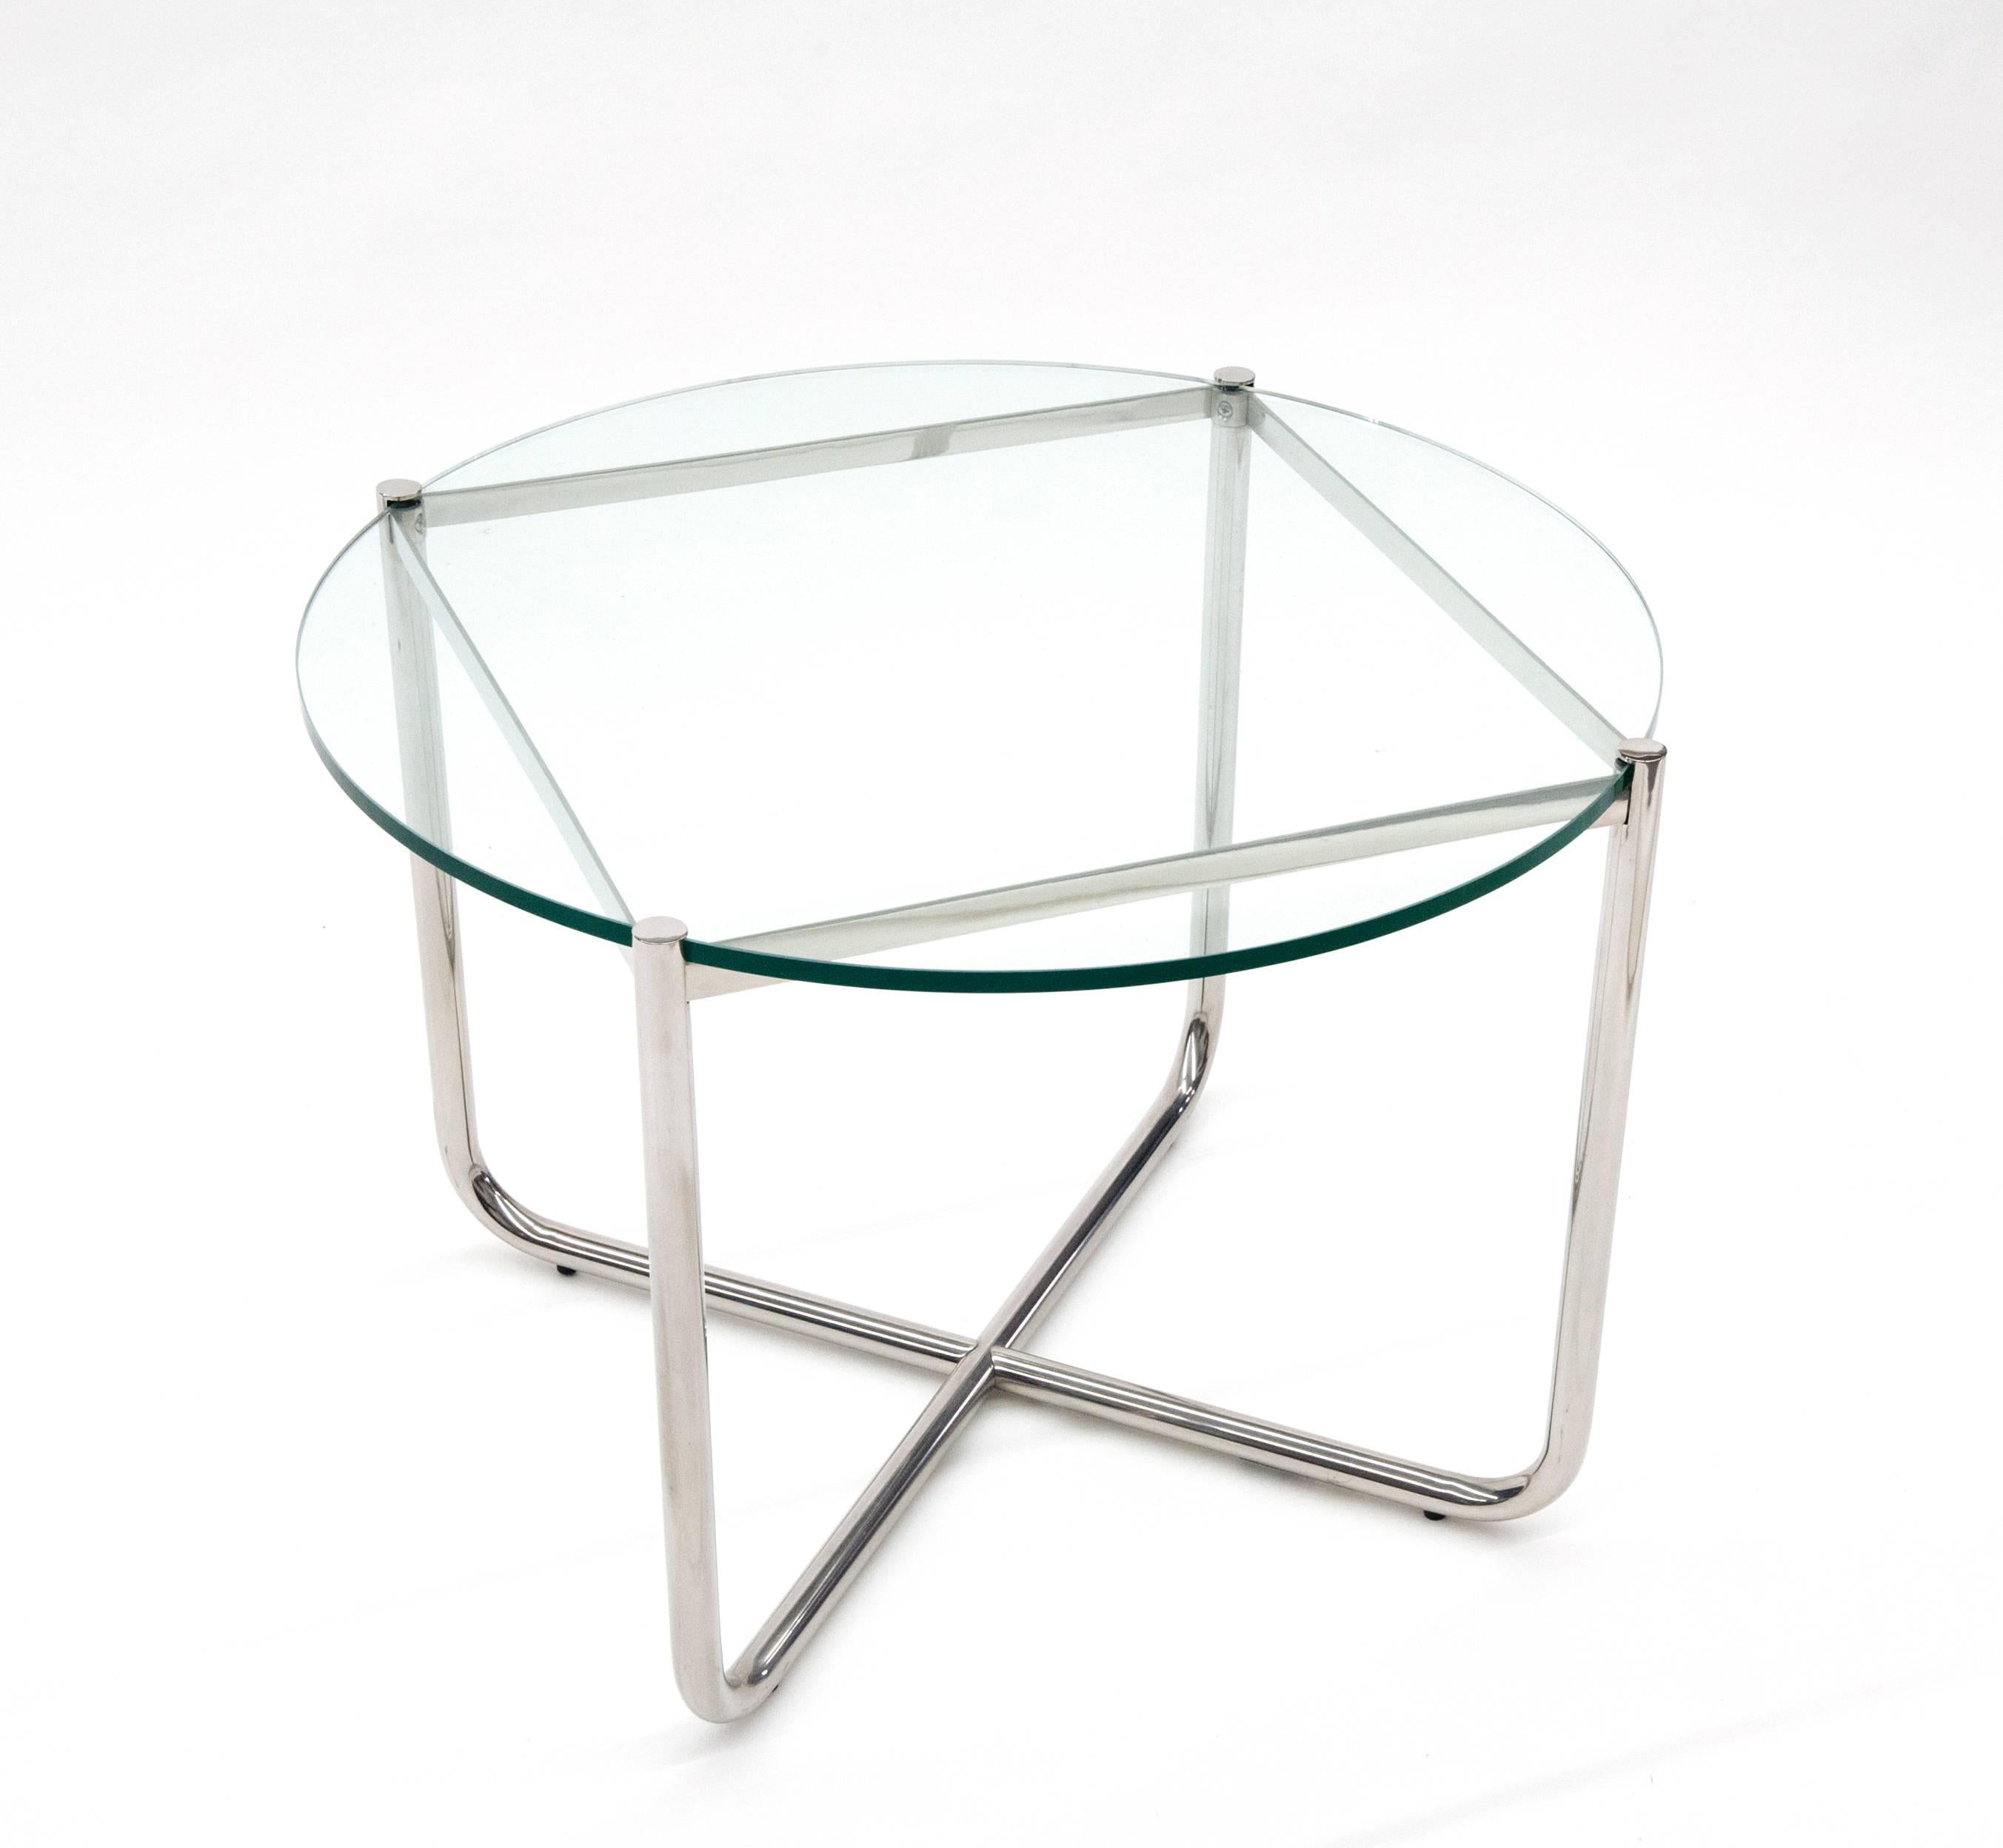 Classic modern glass side table designed by Mies van der Rohe and manufactured by Knoll. Table was designed in 1927 for the Tugendhat house. Glass is 1/2